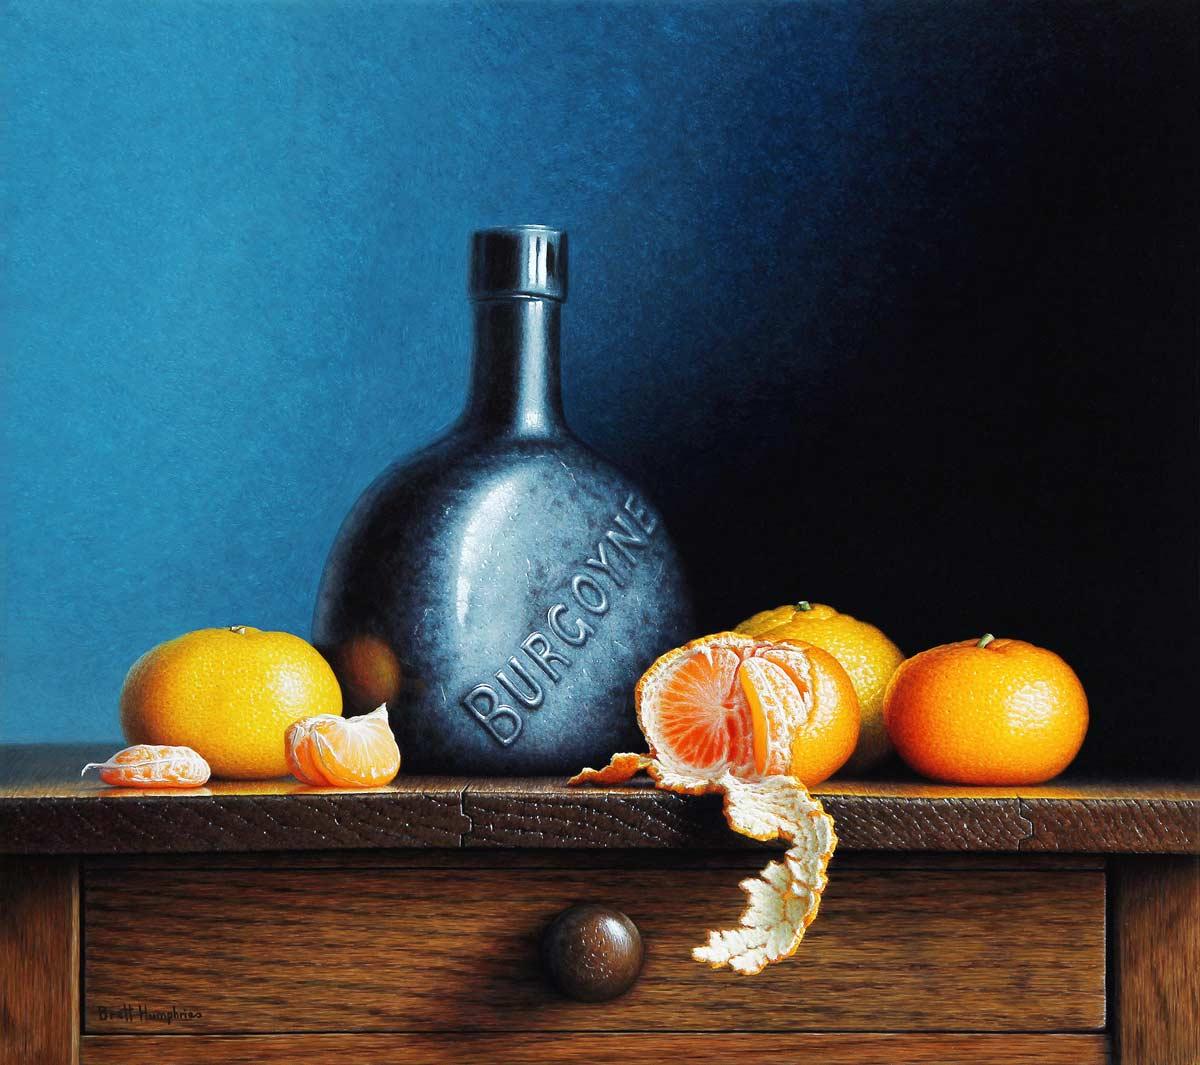 Brett Humphries, Bottle and Clementines - acrylic on board